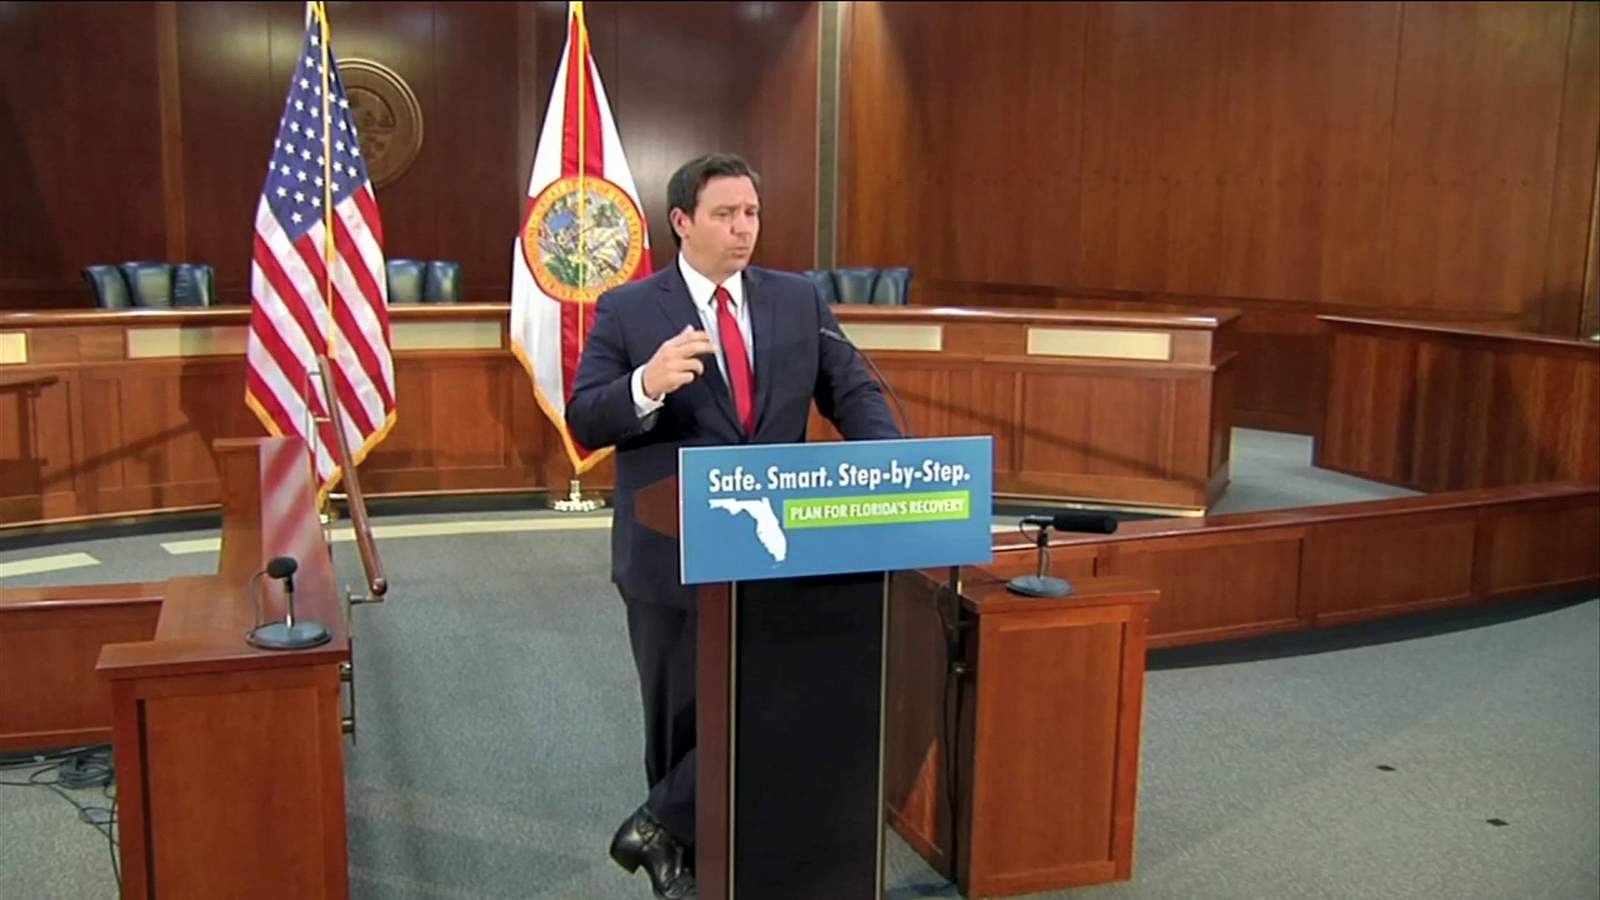 WATCH LIVE AT NOON: Gov. Ron DeSantis provides COVID-19 update as state continues to see increasing cases